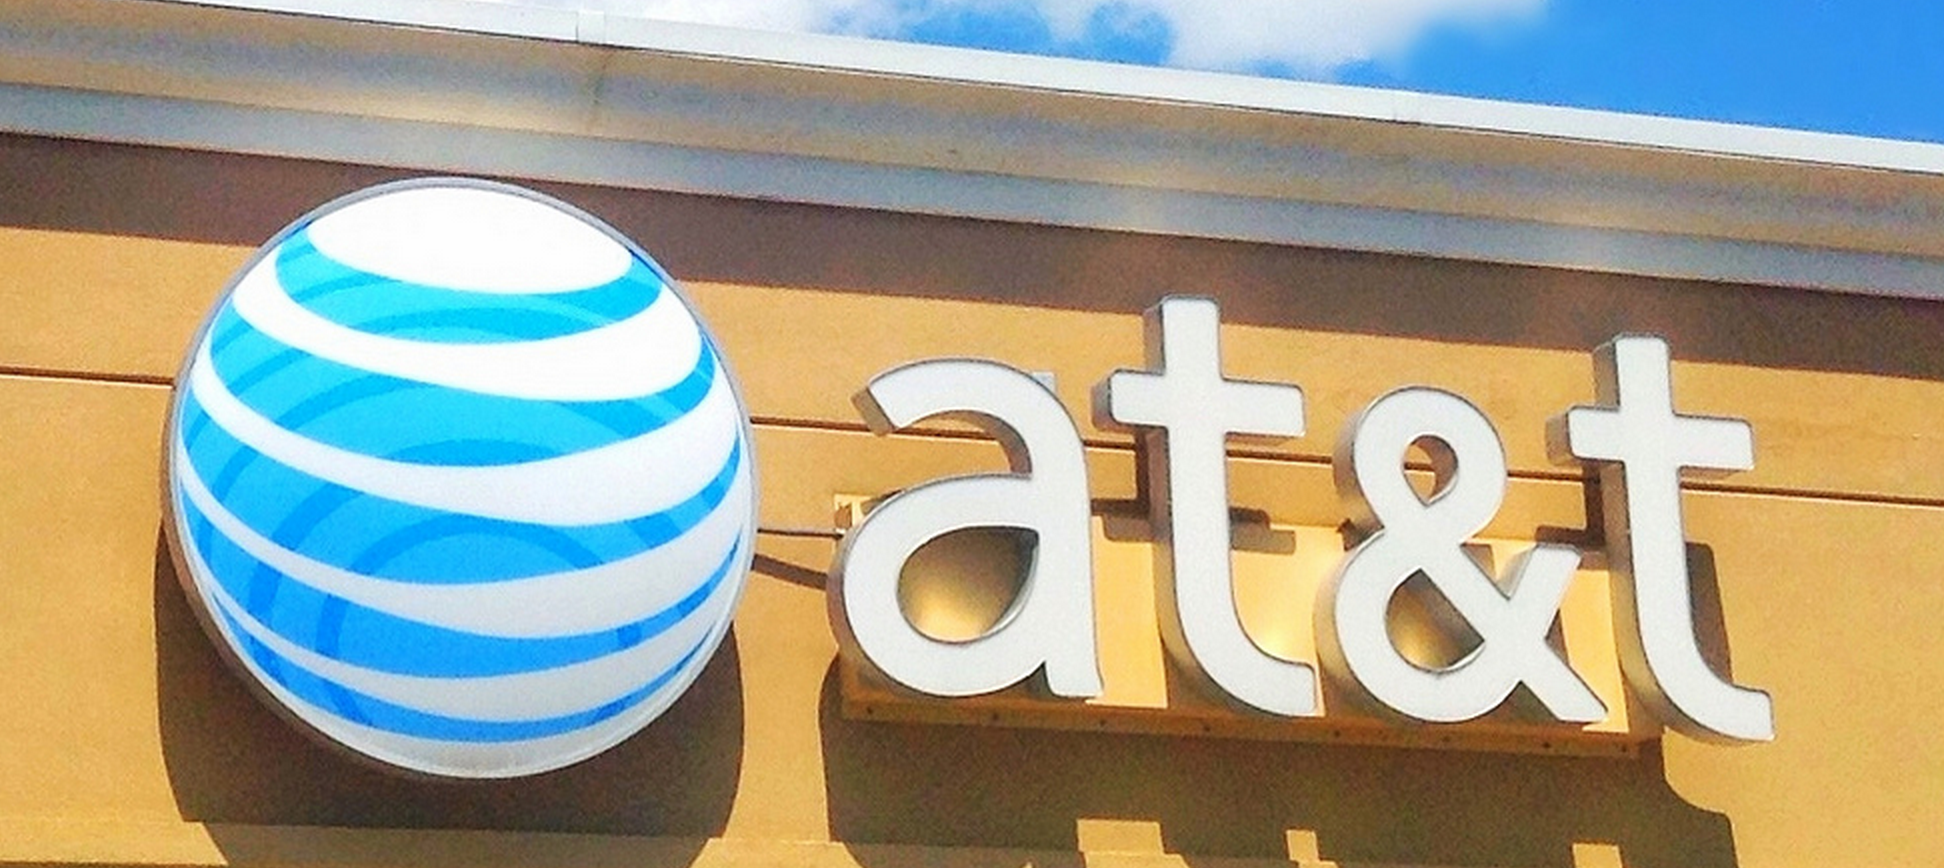 AT&T To Free Up More Data For Mobile Subscribers, At Cost Of Net Neutrality